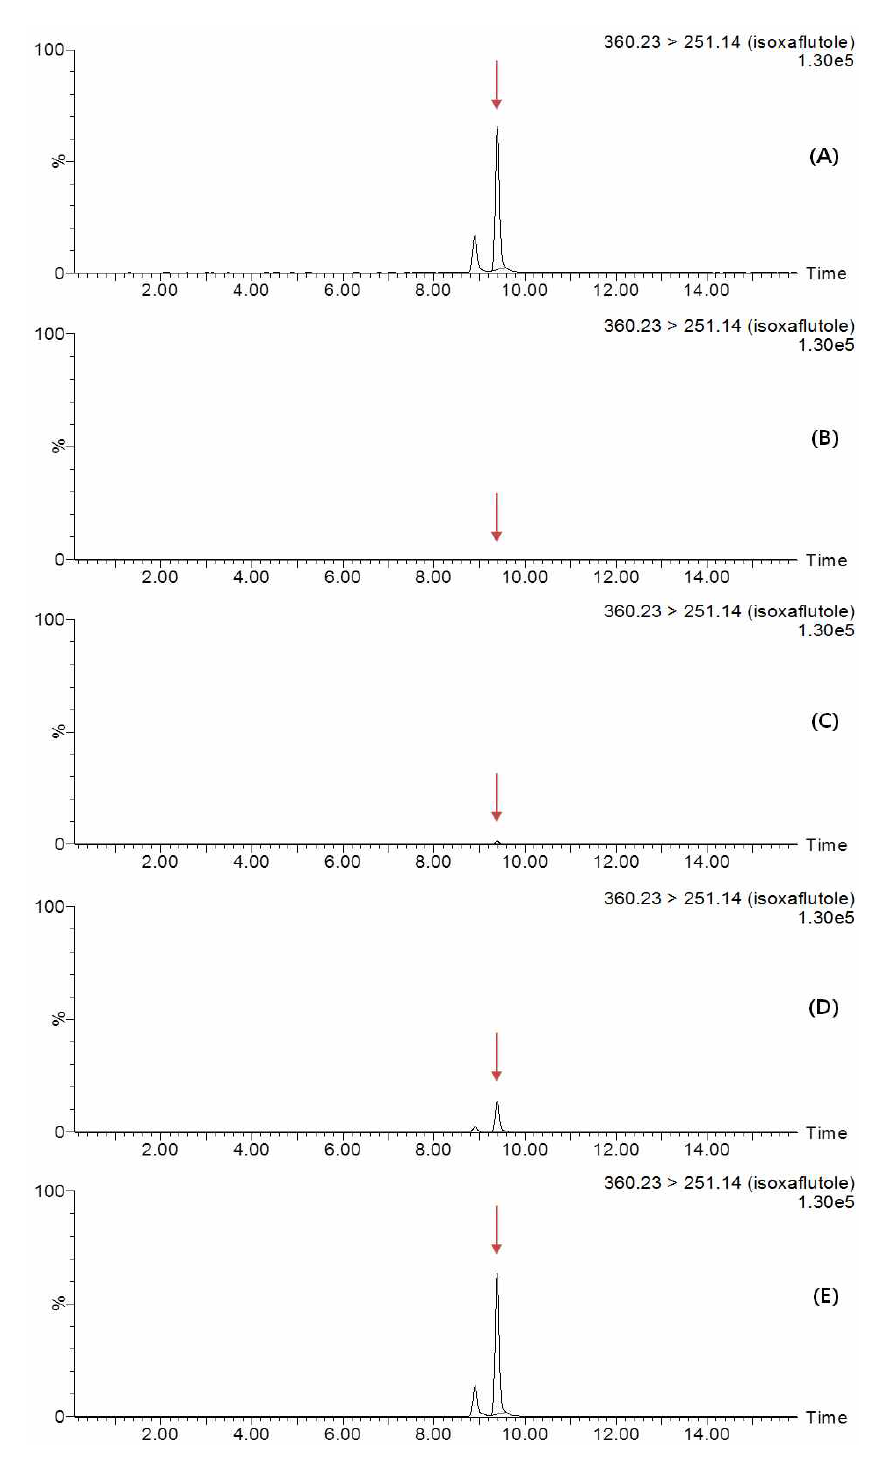 Representative MRM (quantification ion) chromatograms of isoxaflutole corresponding to: (A) standard solution at 1 mg/kg, (B) pepper control, (C) spiked at 0.01 mg/kg, (D) spiked at 0.1 mg/kg and (E) spiked at 0.5 mg/kg